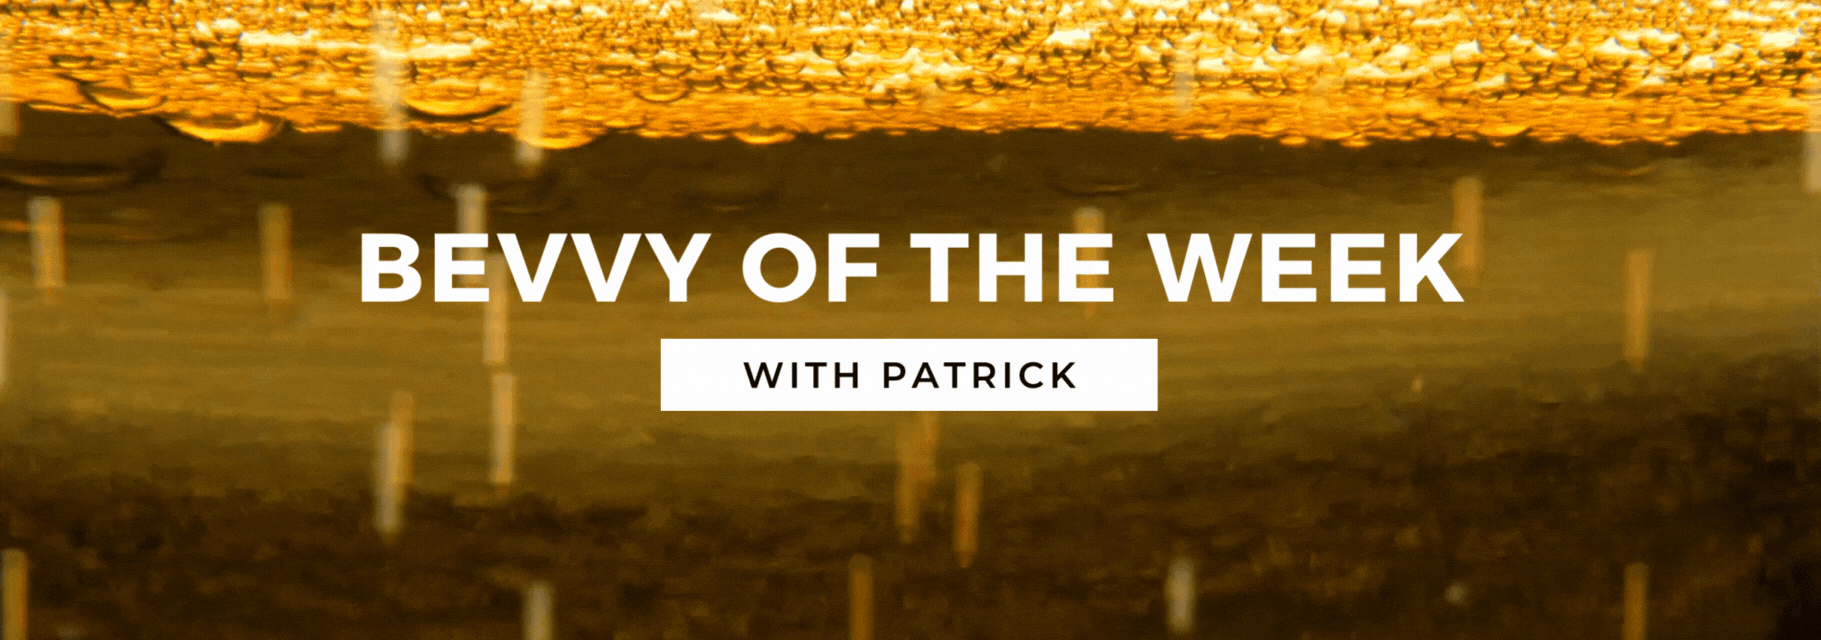 Bevvy of the Week - with Patrick - The Life of Stuff Irish Travel, Culture & Lifestyle